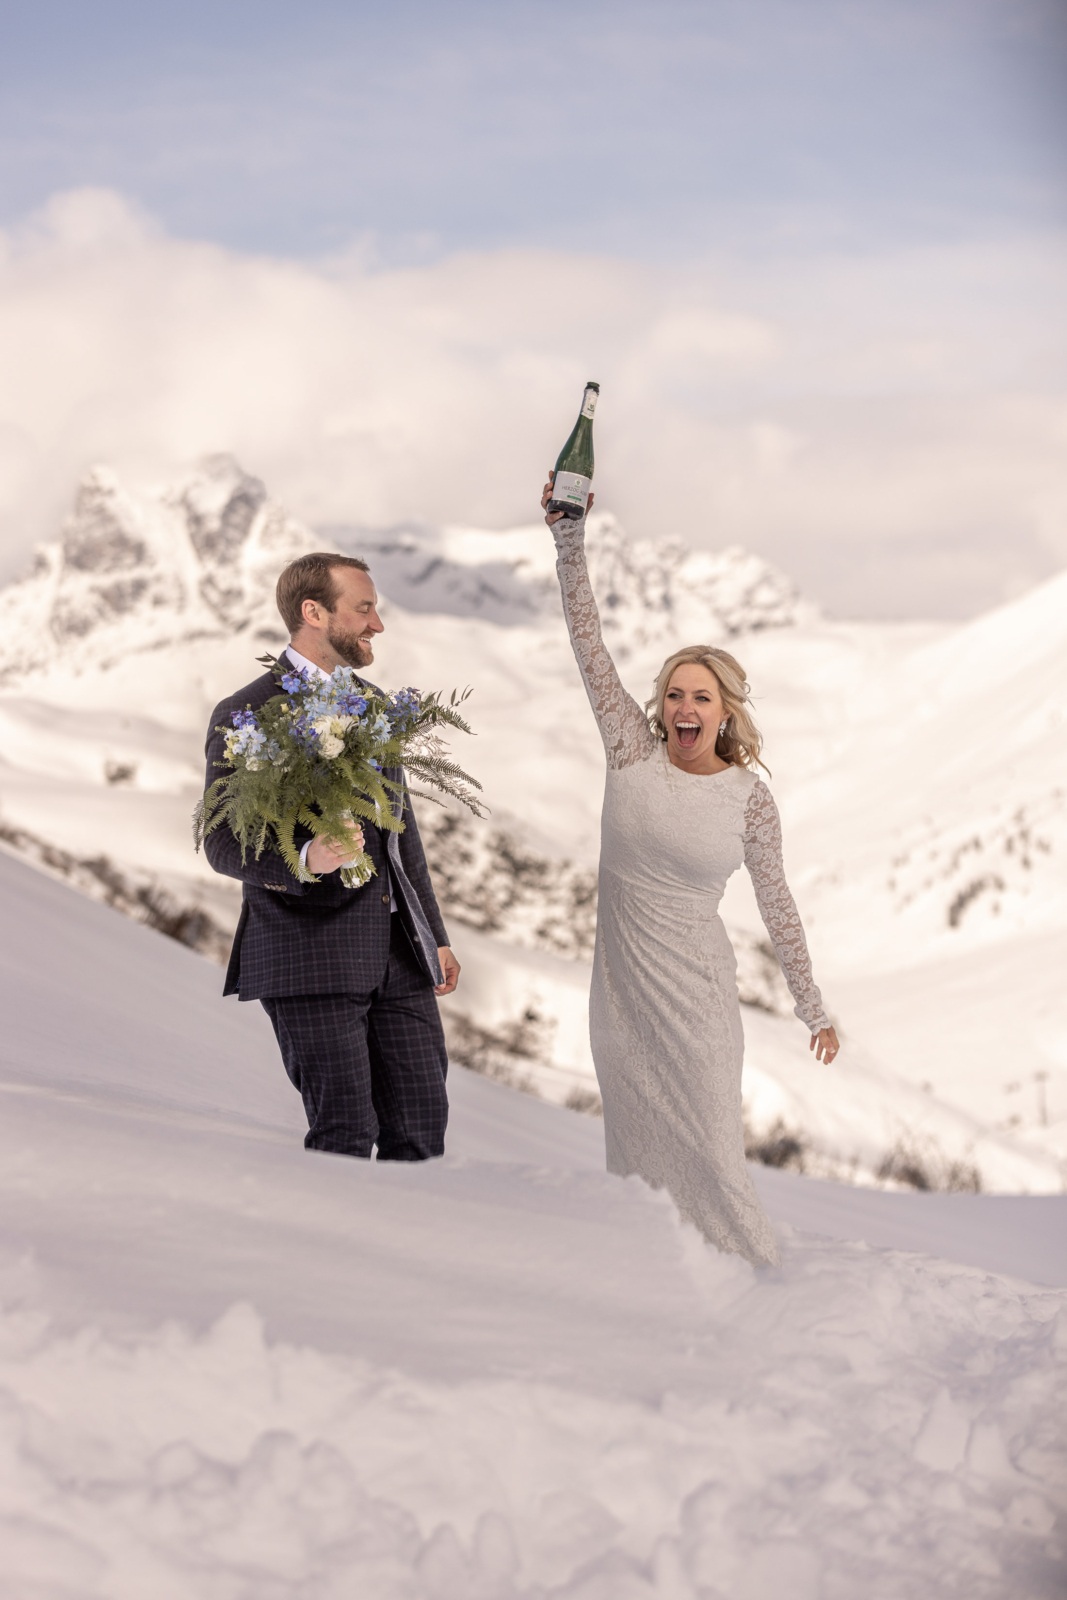 Champagne Pop at the Winter Wedding in Lech am Arlberg